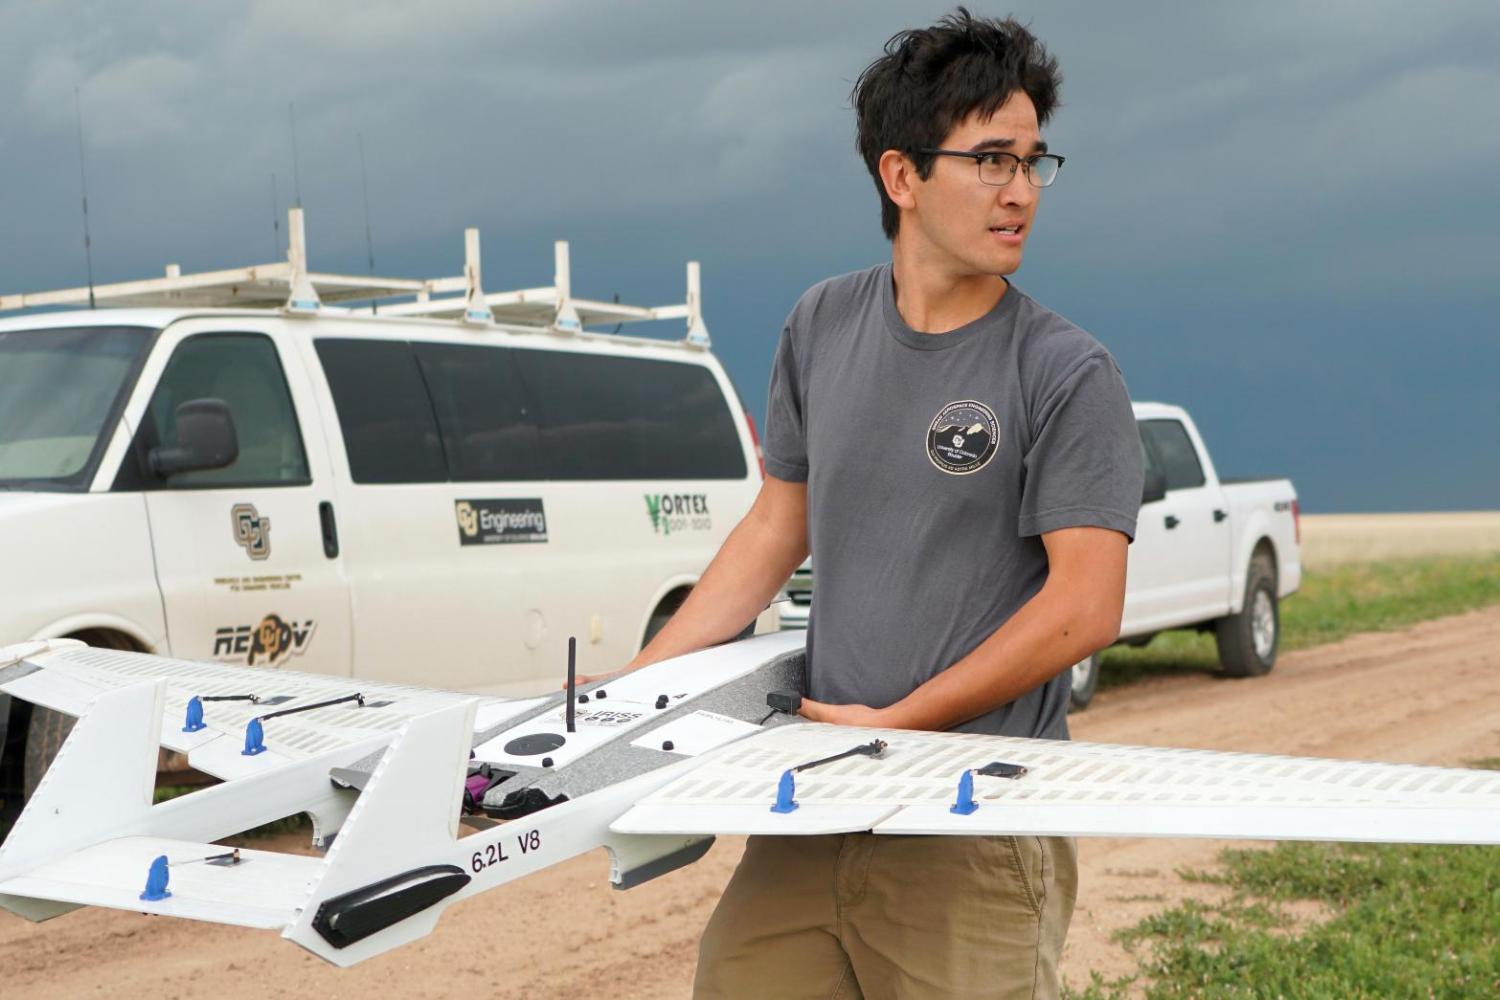 A student holding the drone in the field